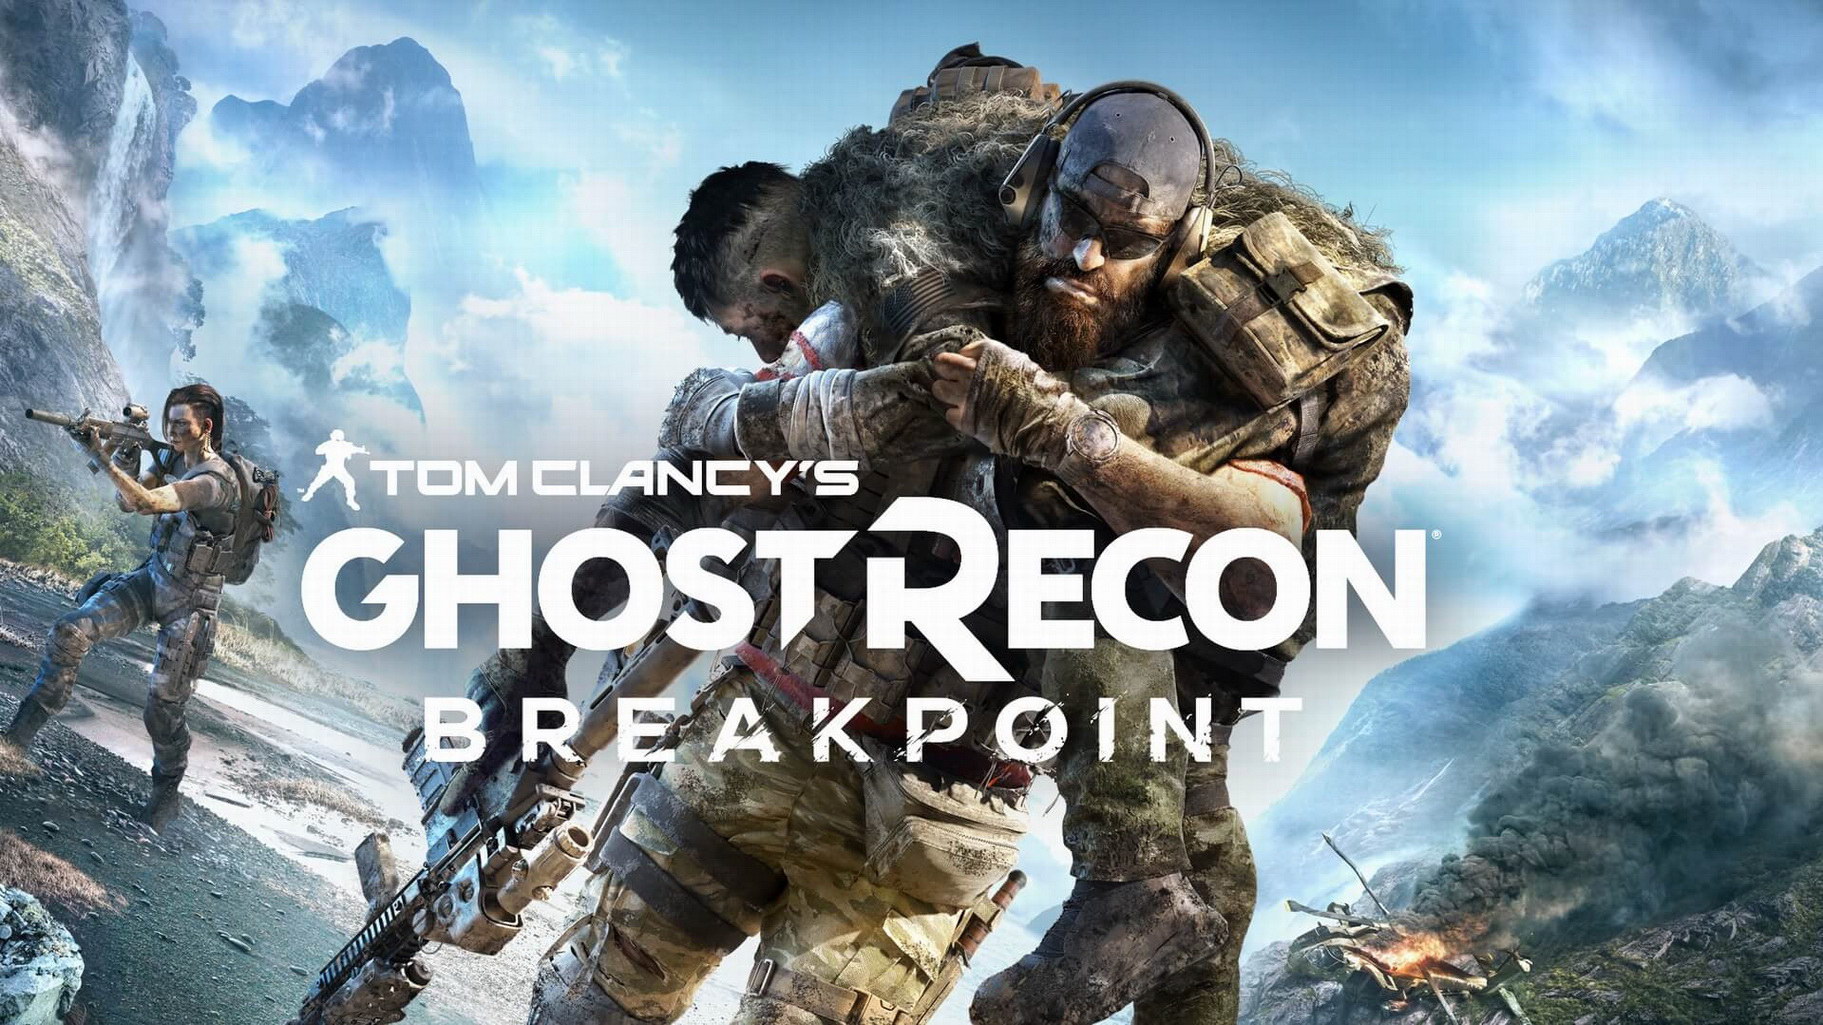 Ghost recon Breakpoint - Test